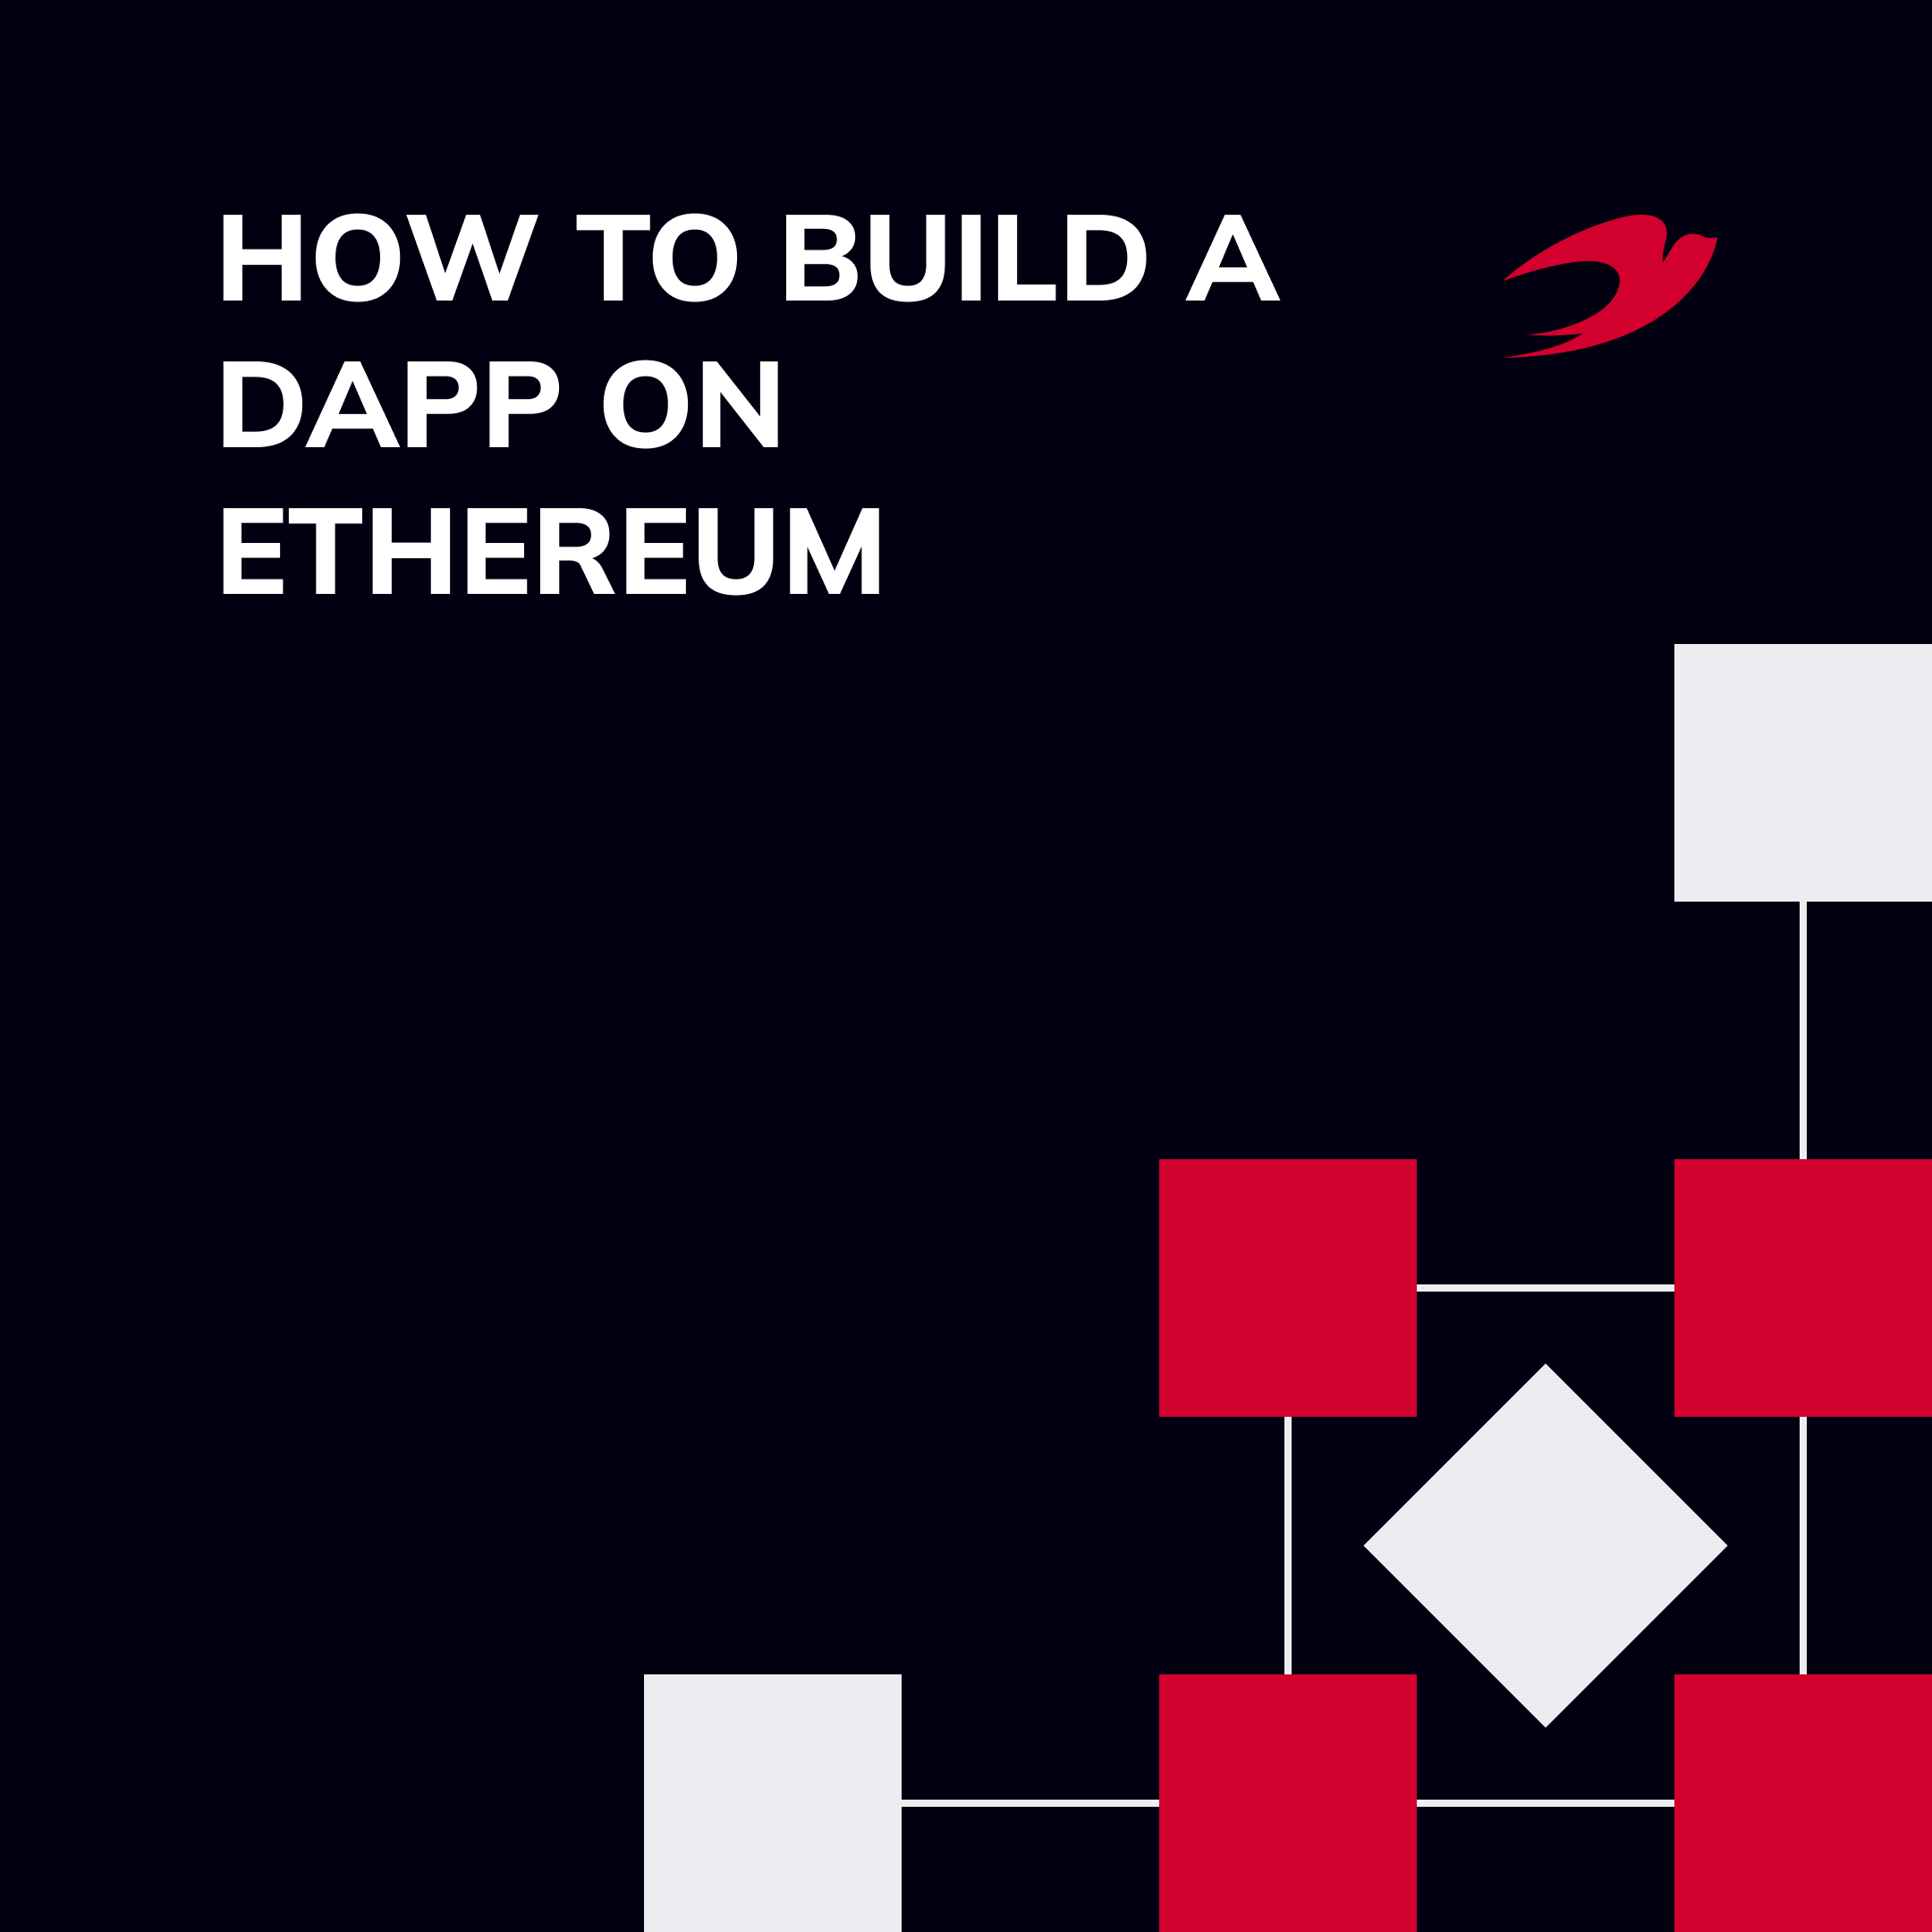 How to Build a Dapp on Ethereum